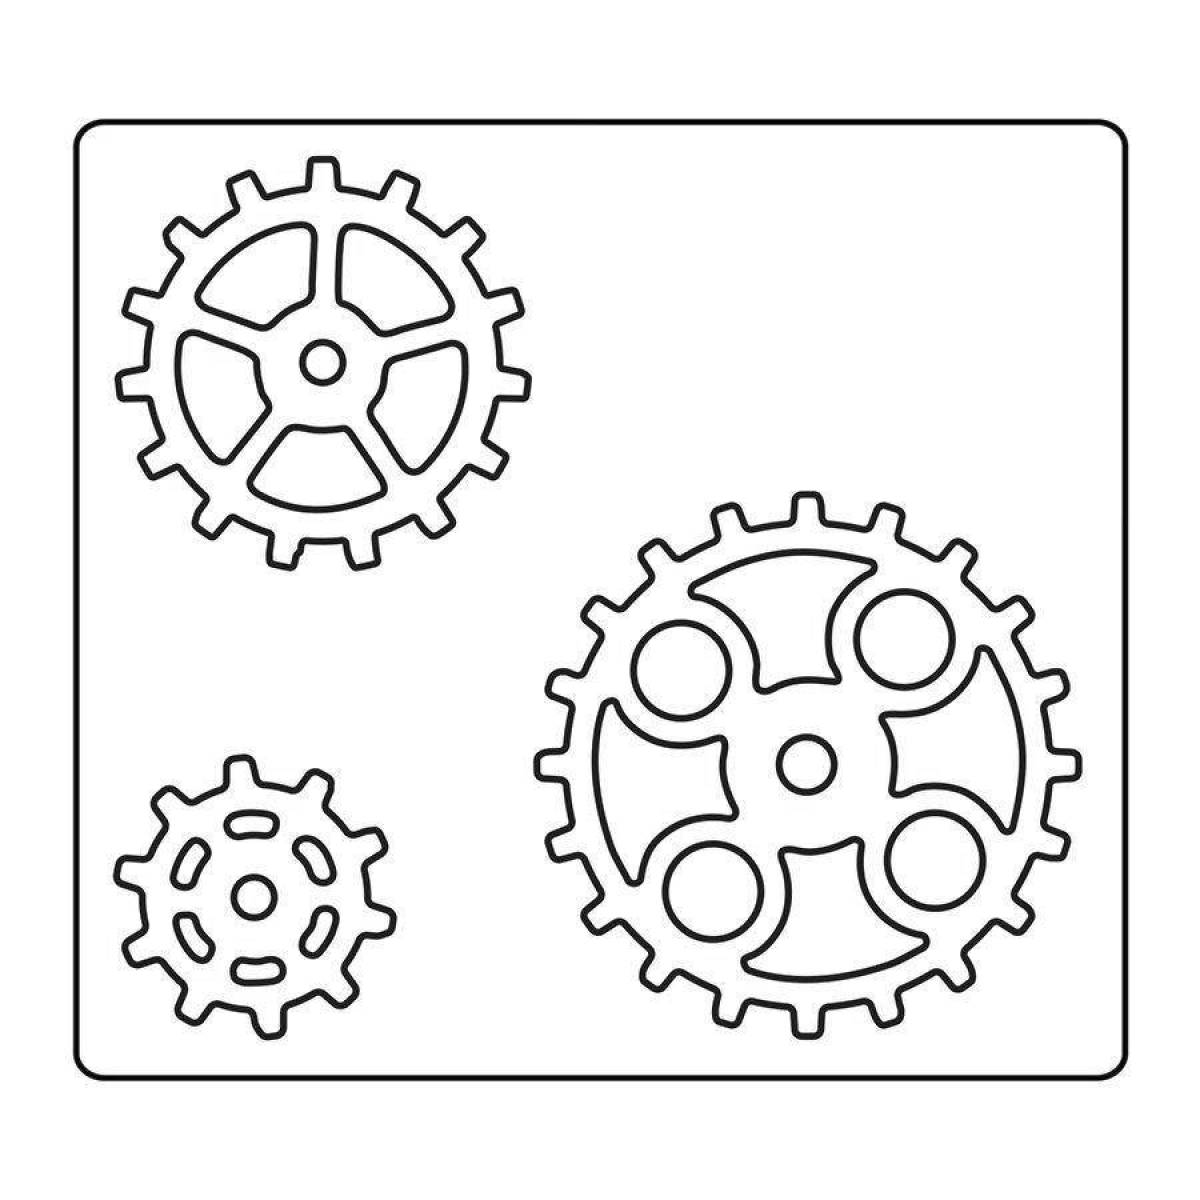 Fun gear coloring pages